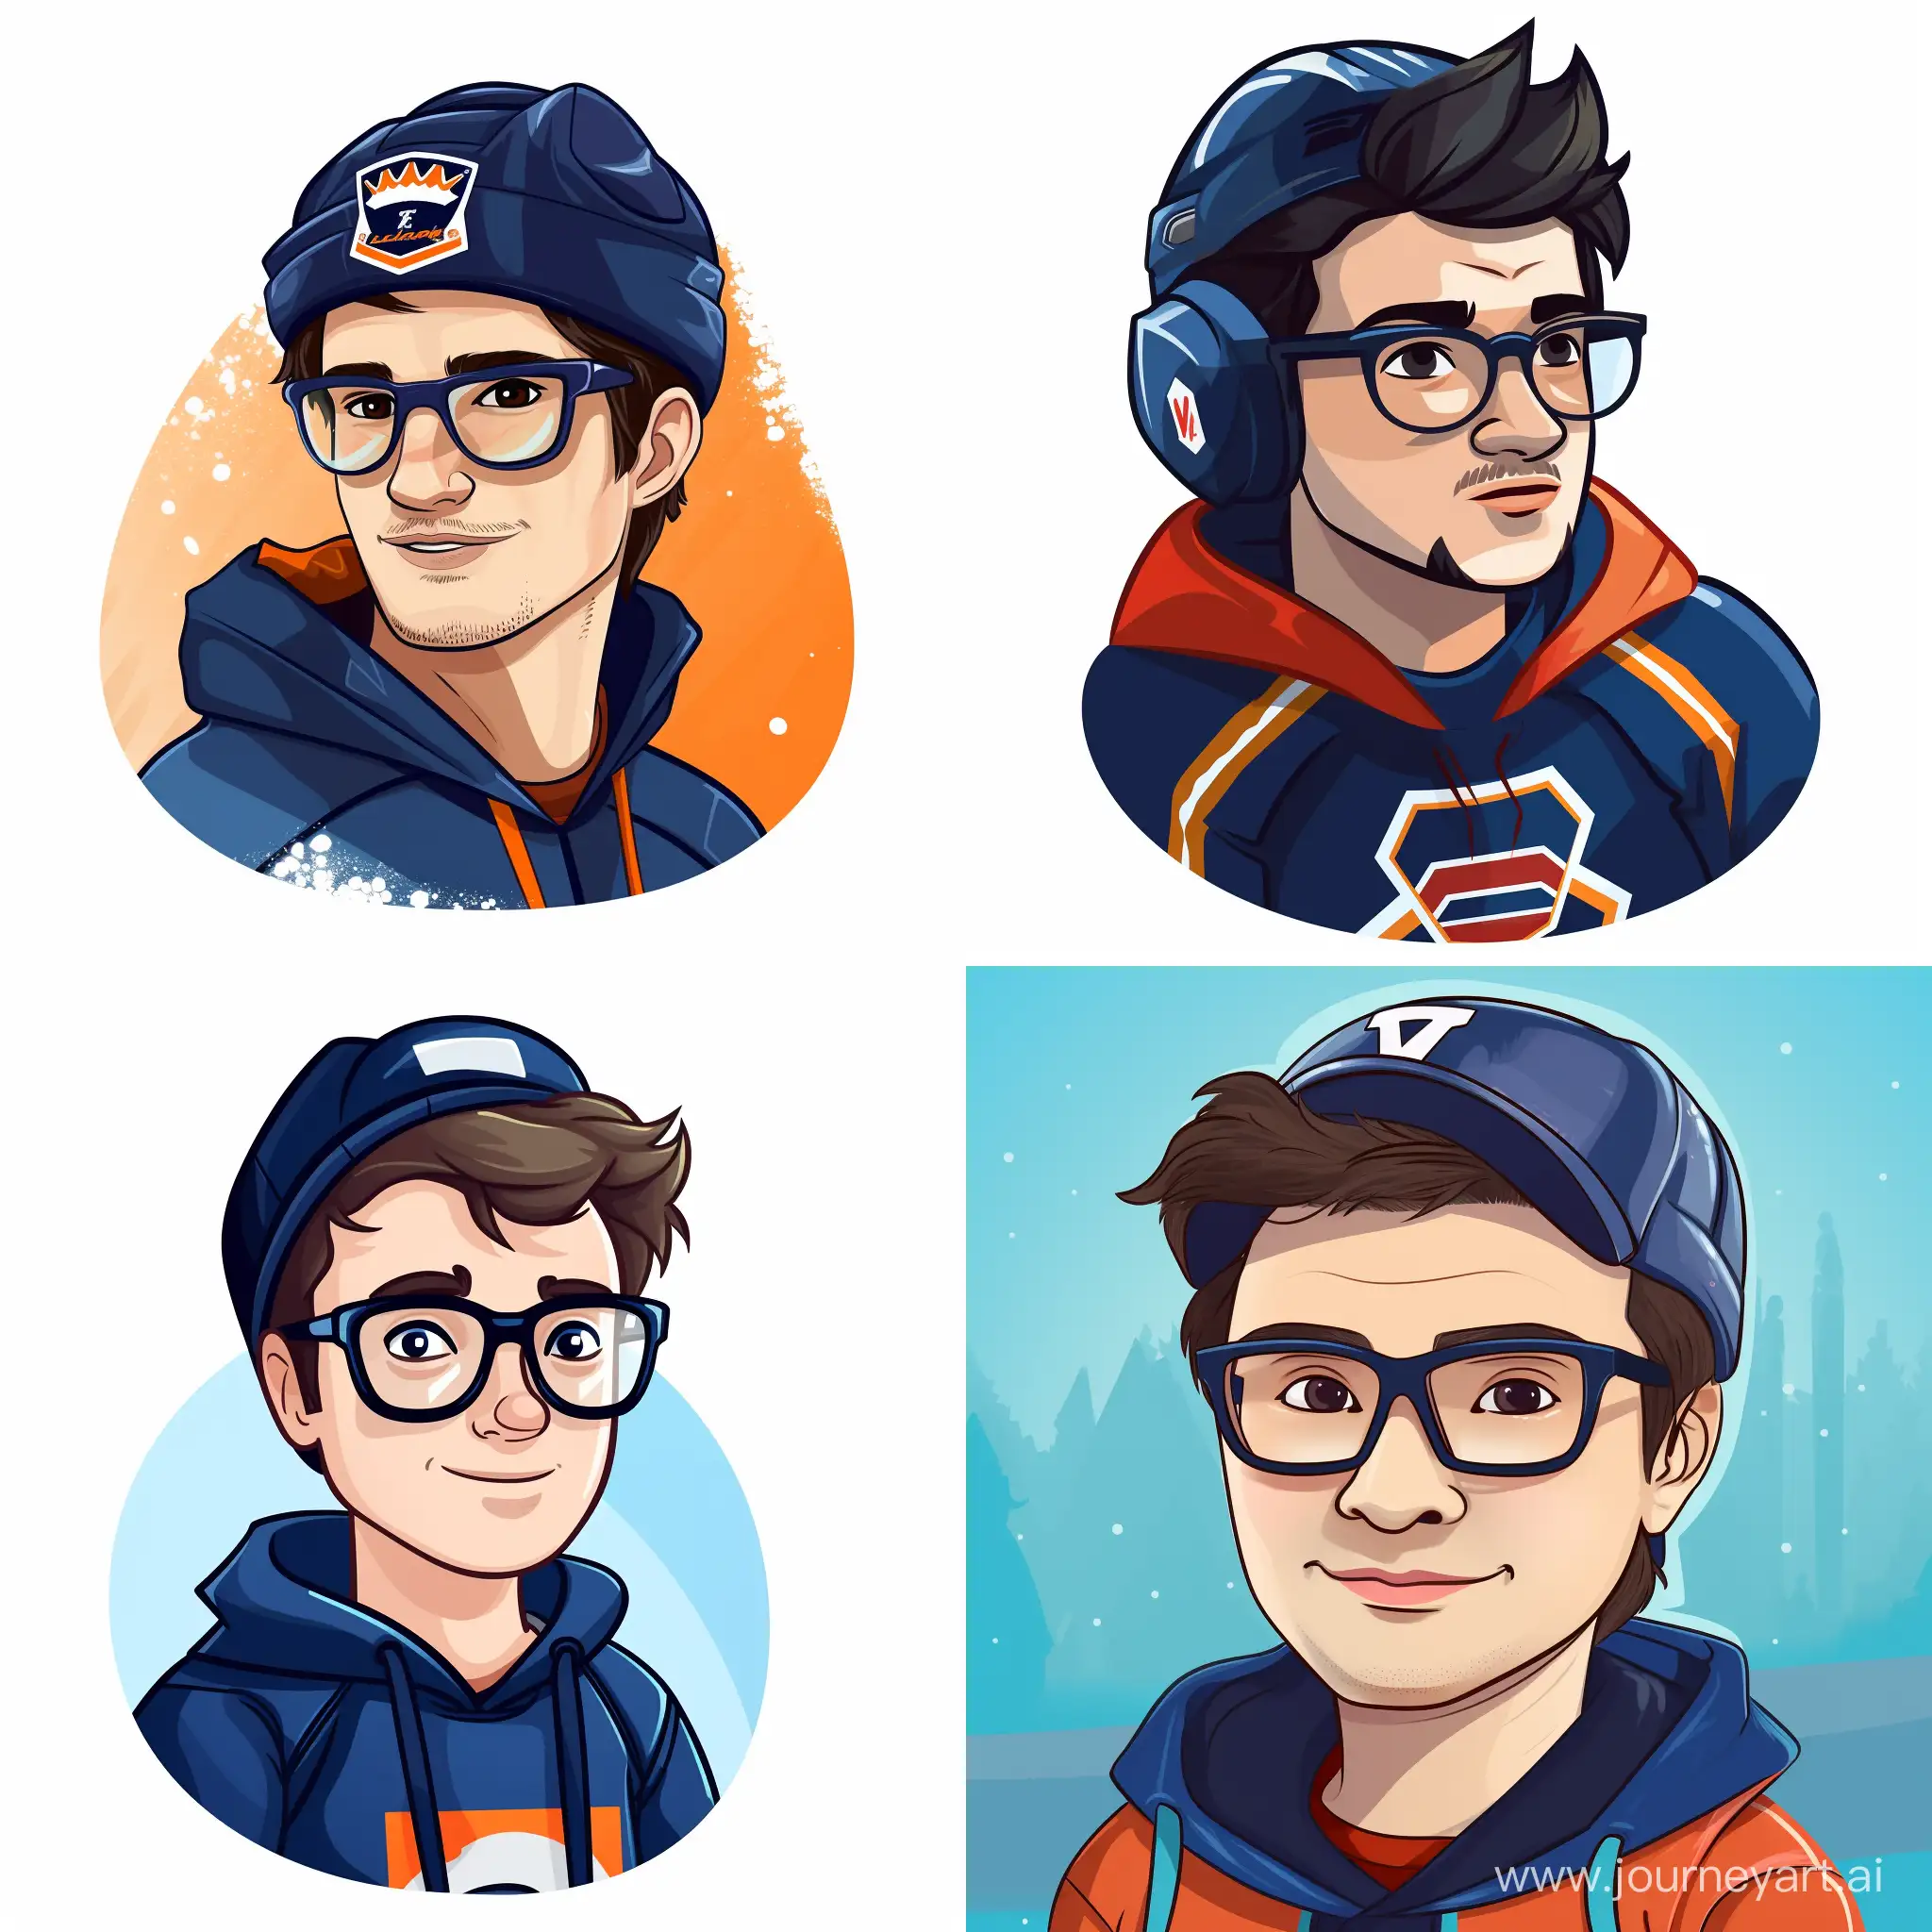 Cheerful-Programmer-Avatar-in-Hockey-Jersey-and-Hat-for-Jira-Profile